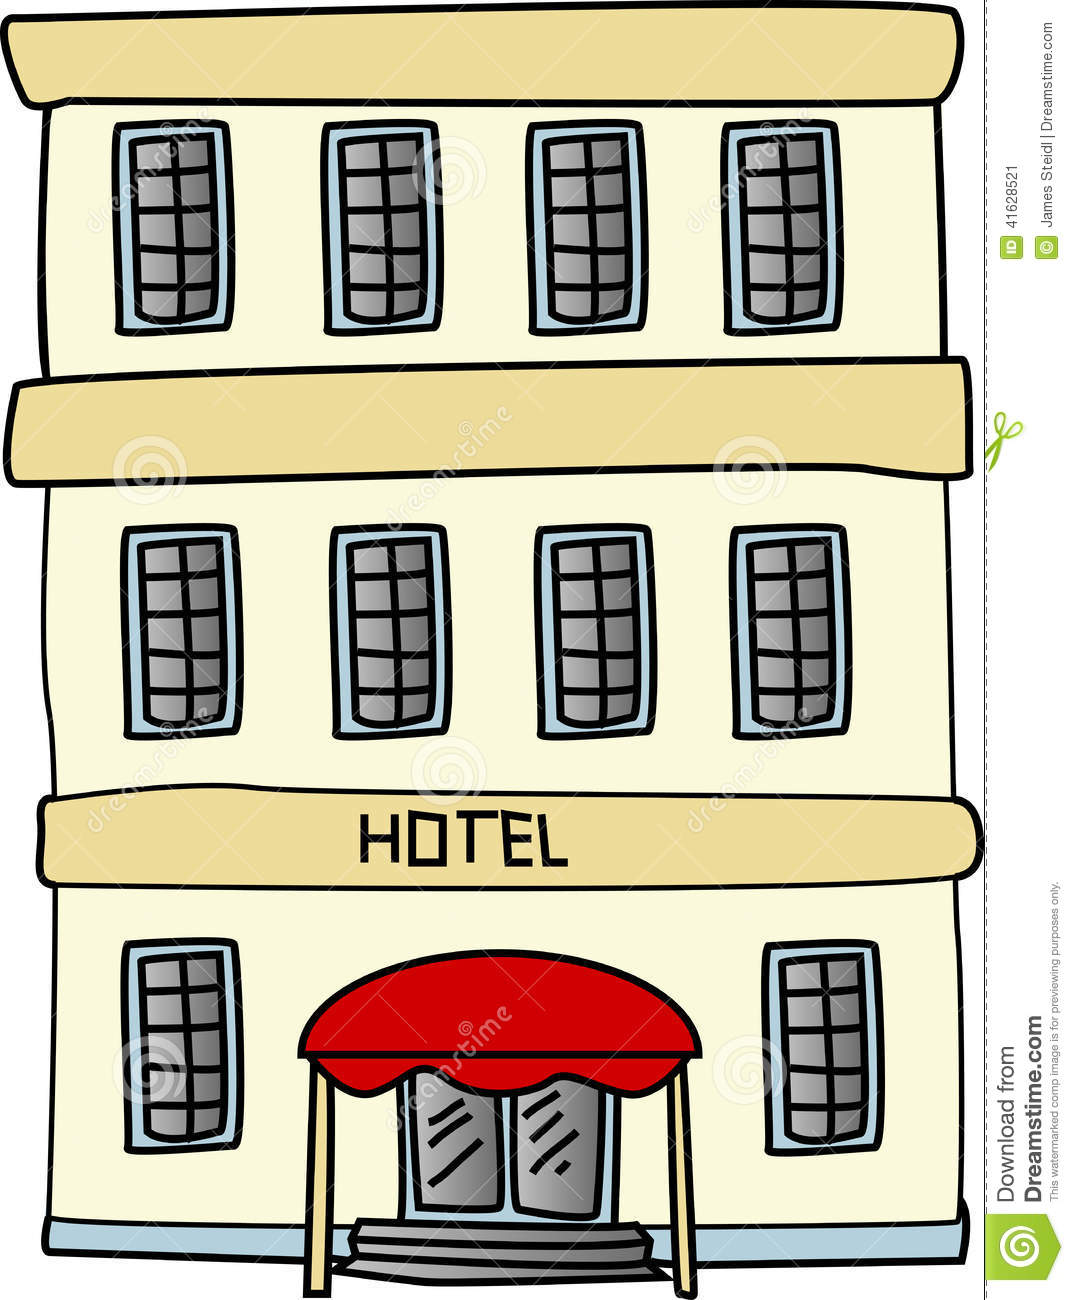 Hotel clipart hotel.